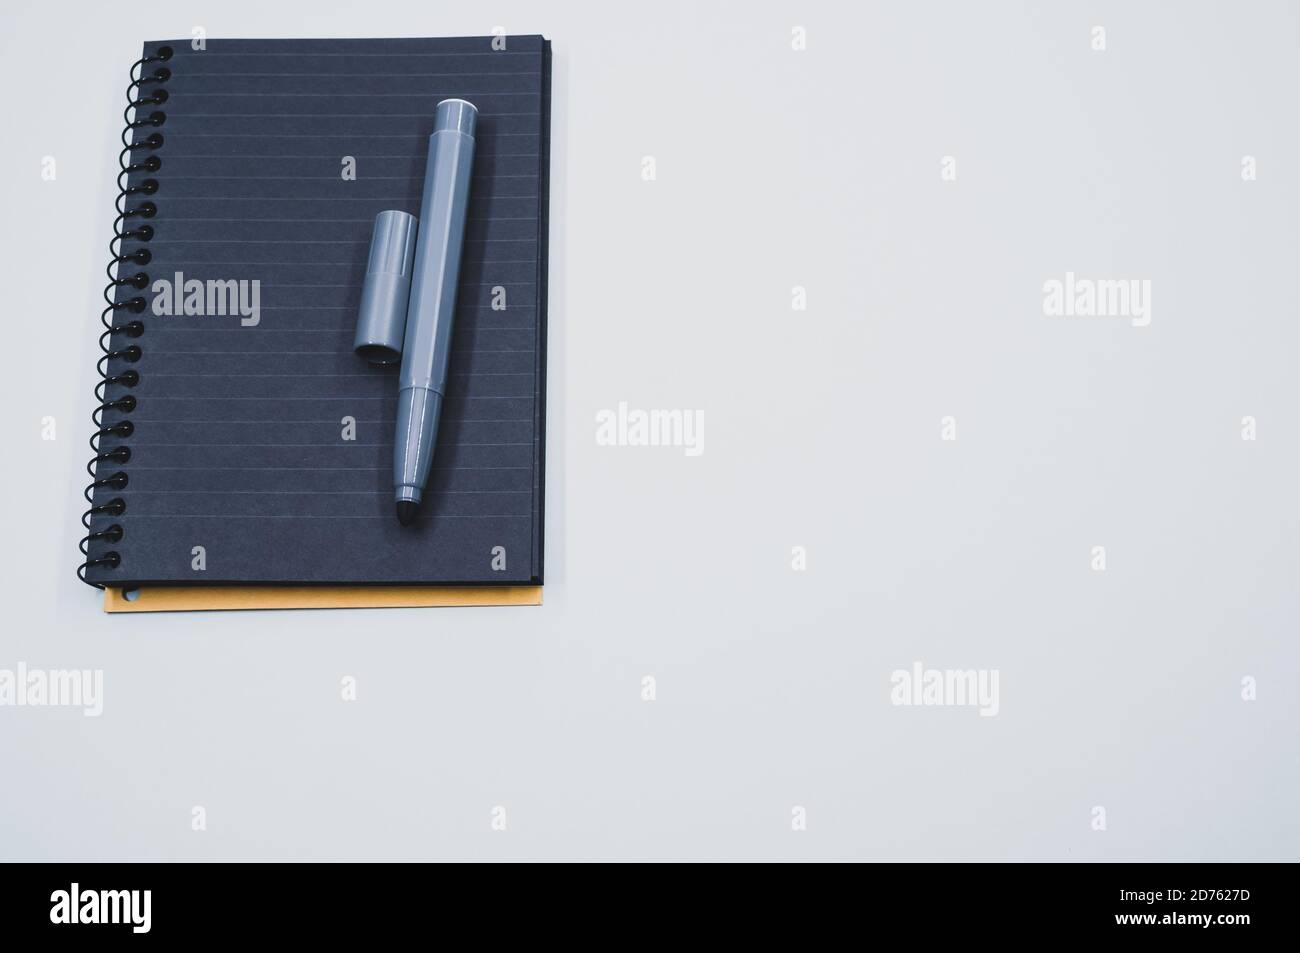 High angle shot of a black notebook and a marker on a blue surface Stock Photo